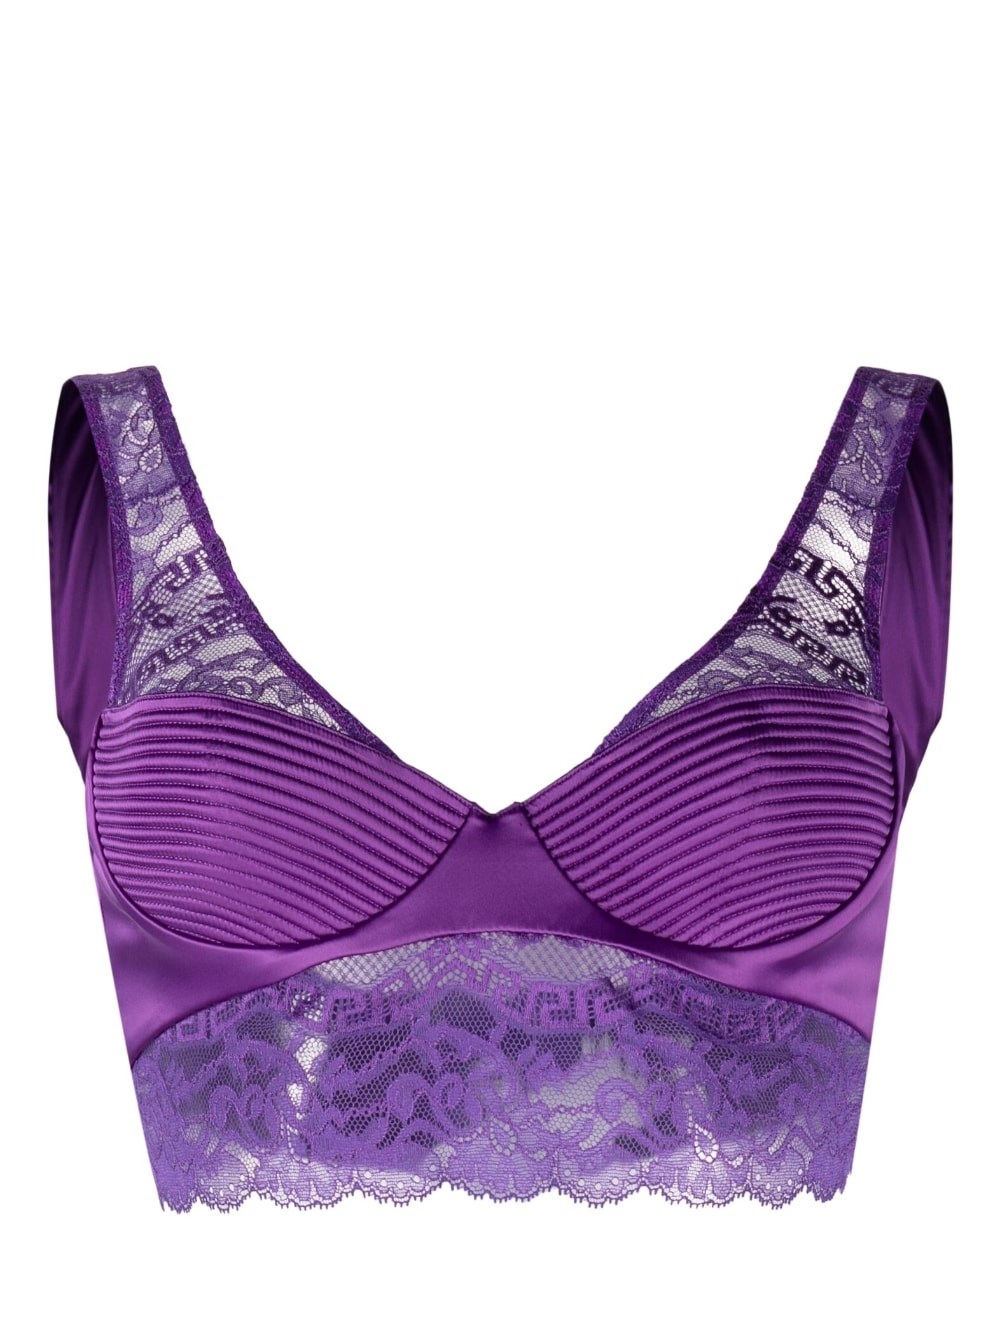 Versace Bralette Top With Lace Details in Purple